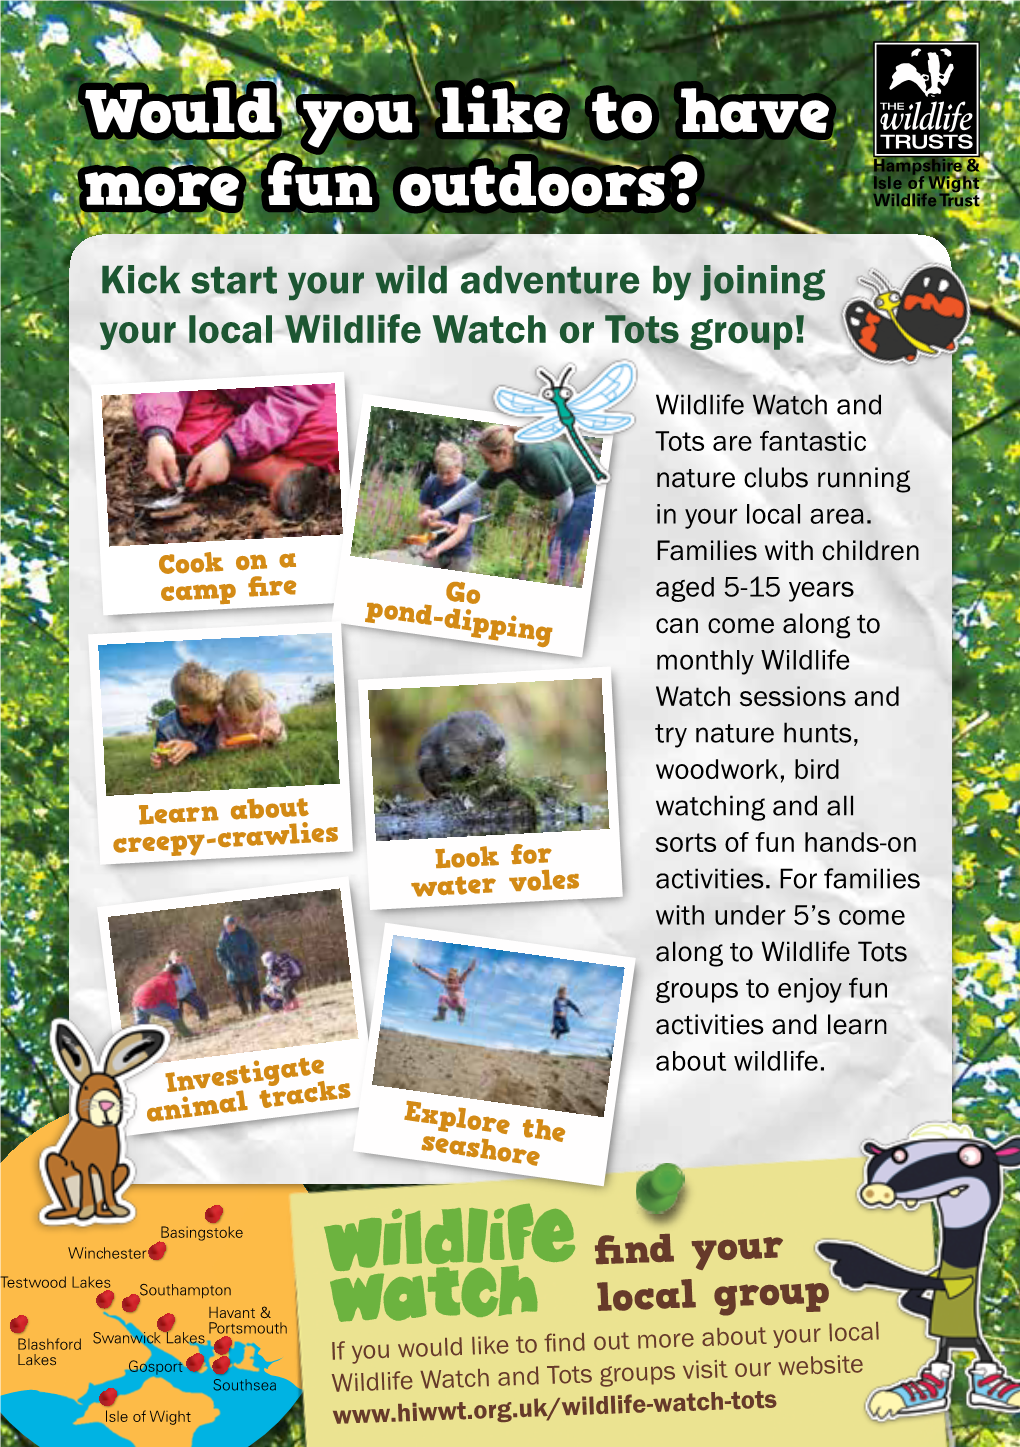 Would You Like to Have More Fun Outdoors? Kick Start Your Wild Adventure by Joining Your Local Wildlife Watch Or Tots Group!